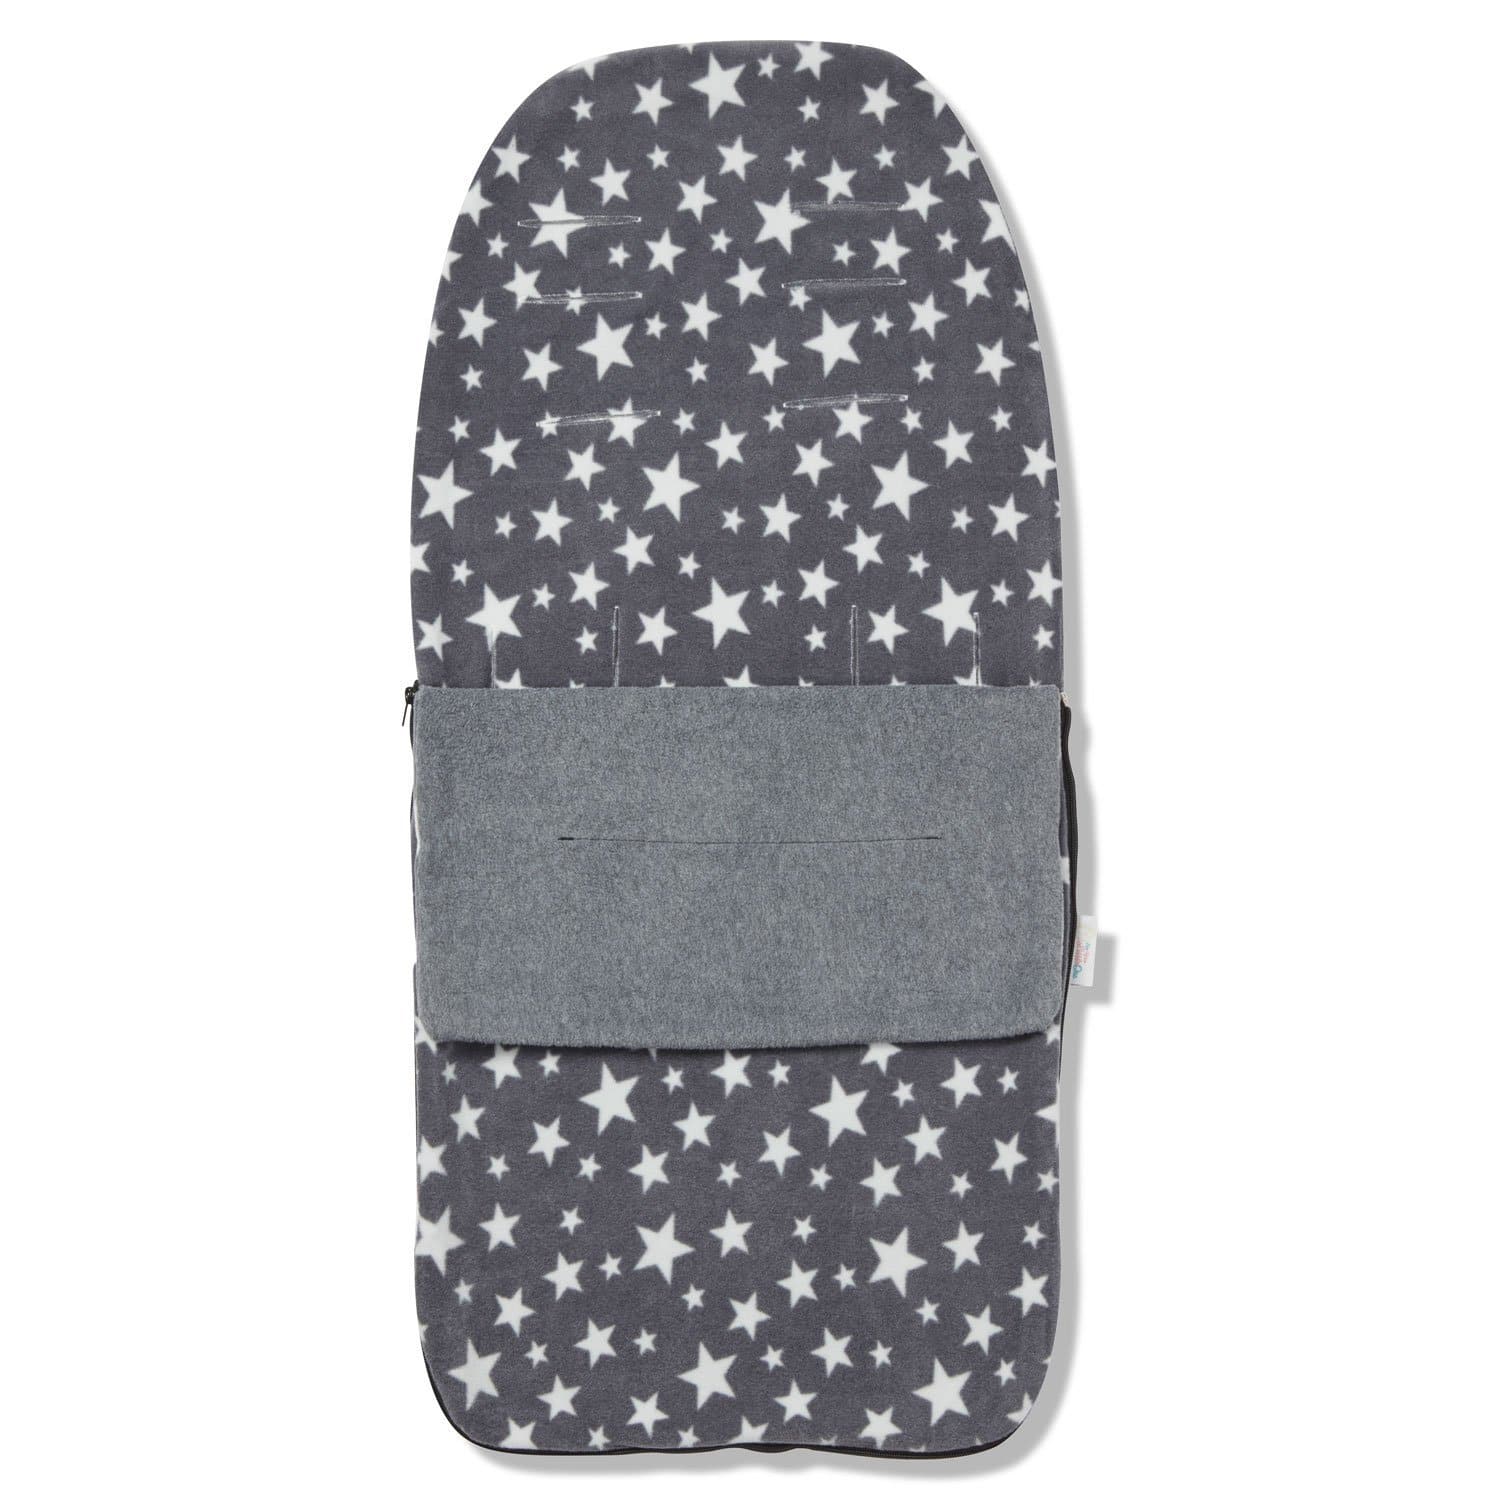 Snuggle Summer Footmuff Compatible with Babybus - Grey Star / Fits All Models | For Your Little One